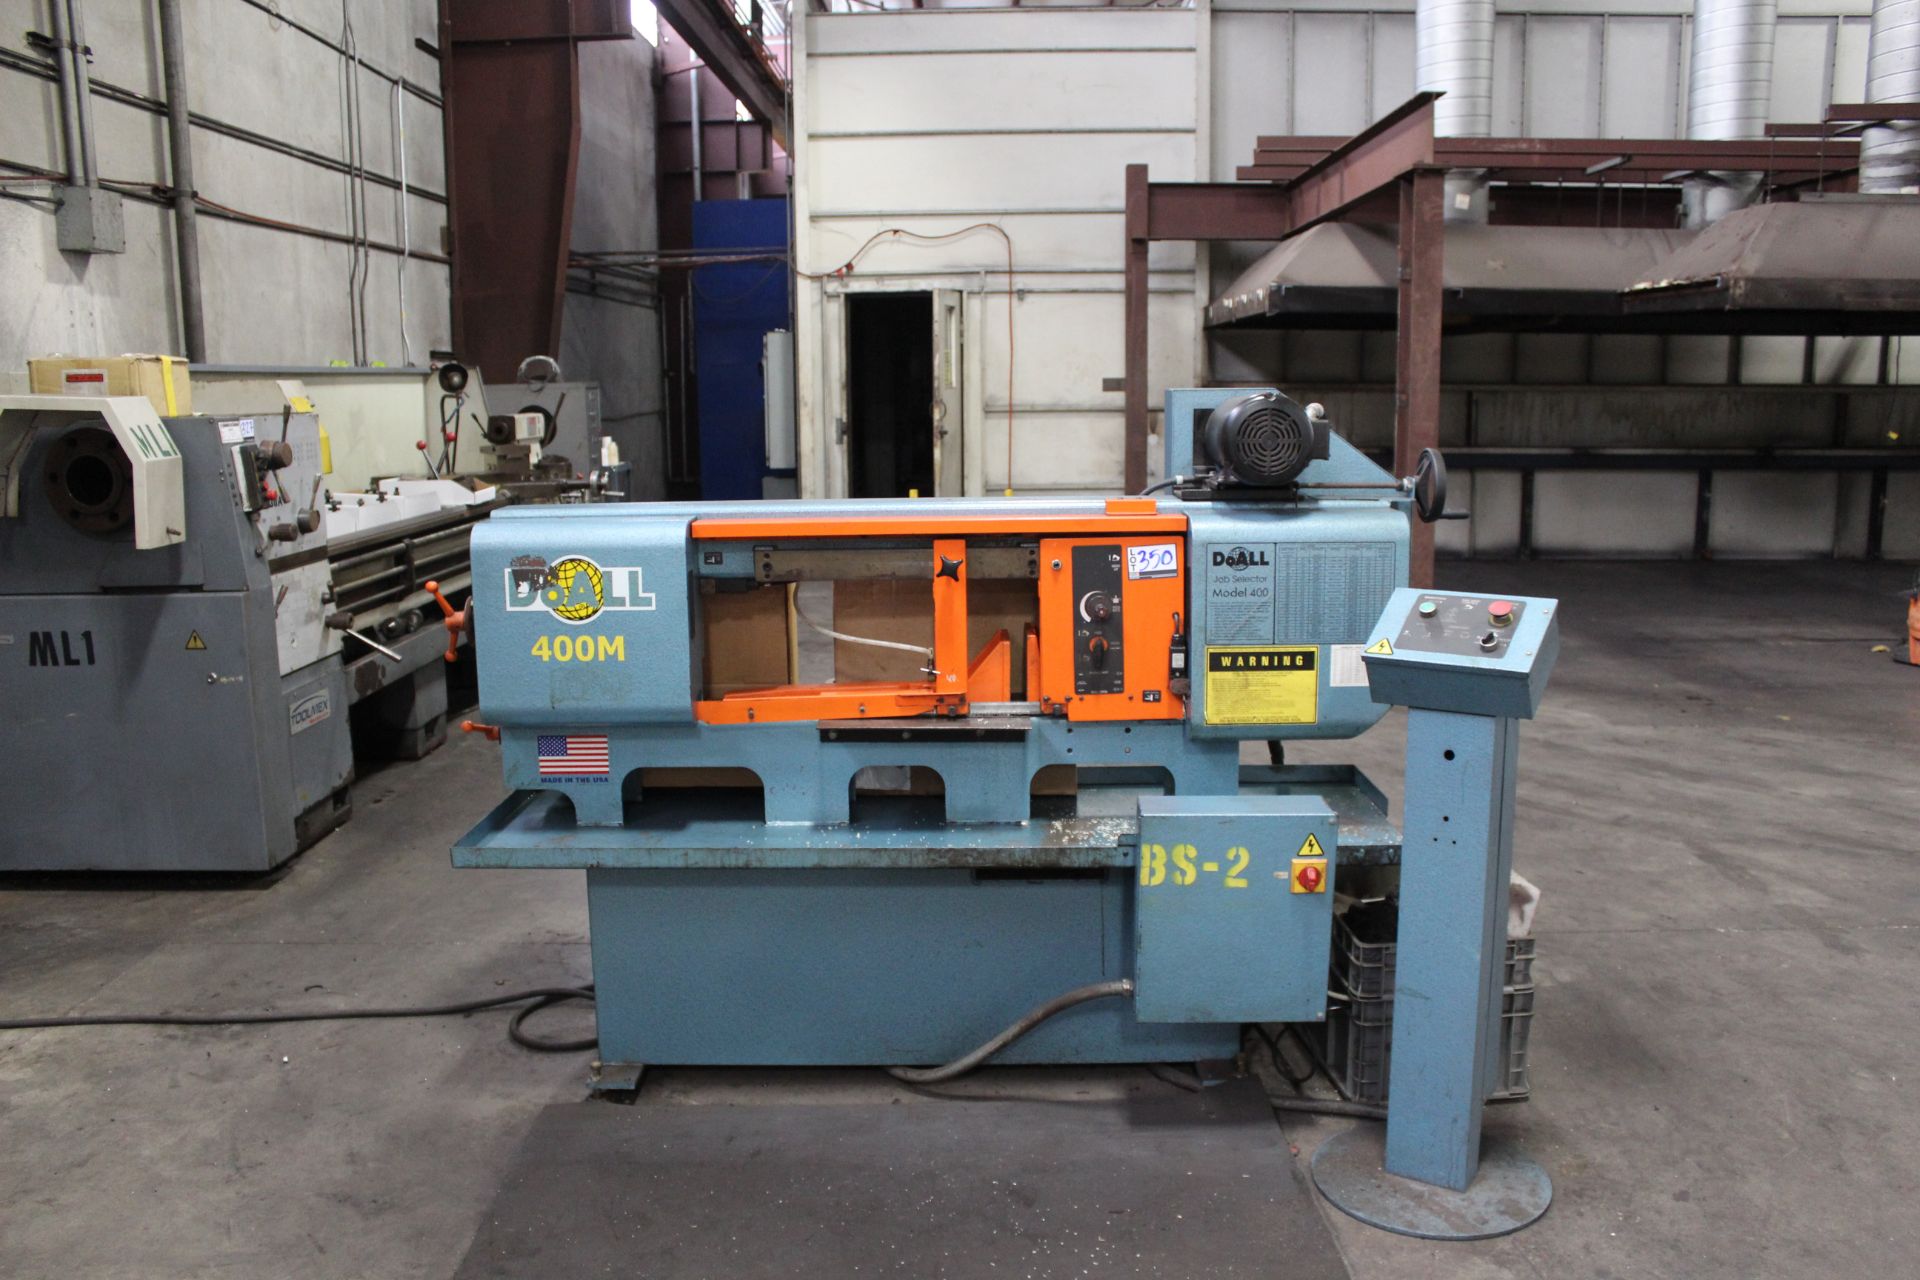 DoAll 400M Horizontal Band Saw, 9” x 16” capacity, infeed table, s/n 596-14485, New 2014